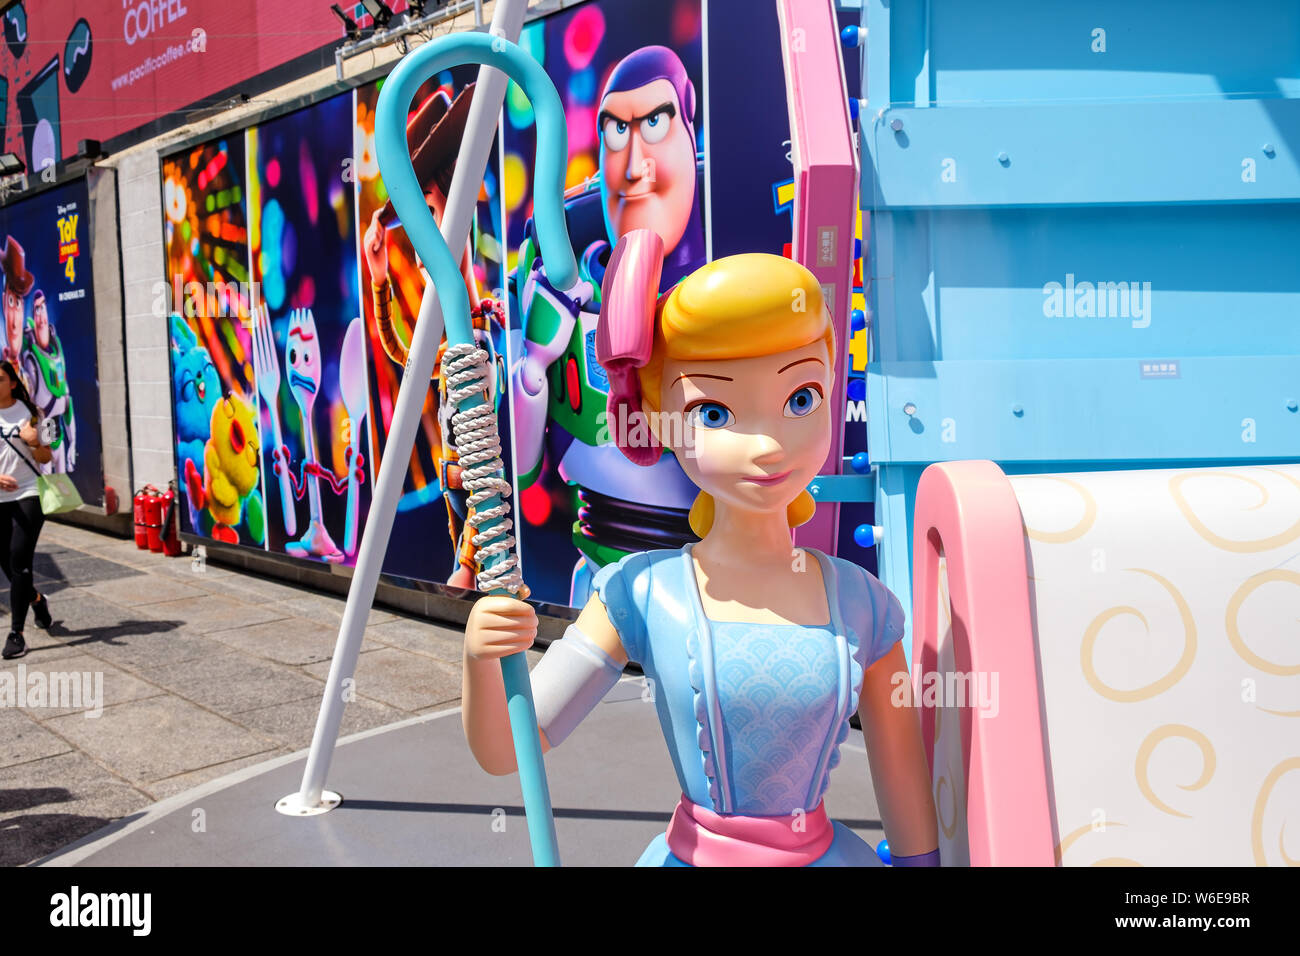 A replica of Bo Peep seen during the Carnival.Toy Story 4 is celebrated with a themed carnival of different games and challenges at Hong Kong Harbour City. Stock Photo